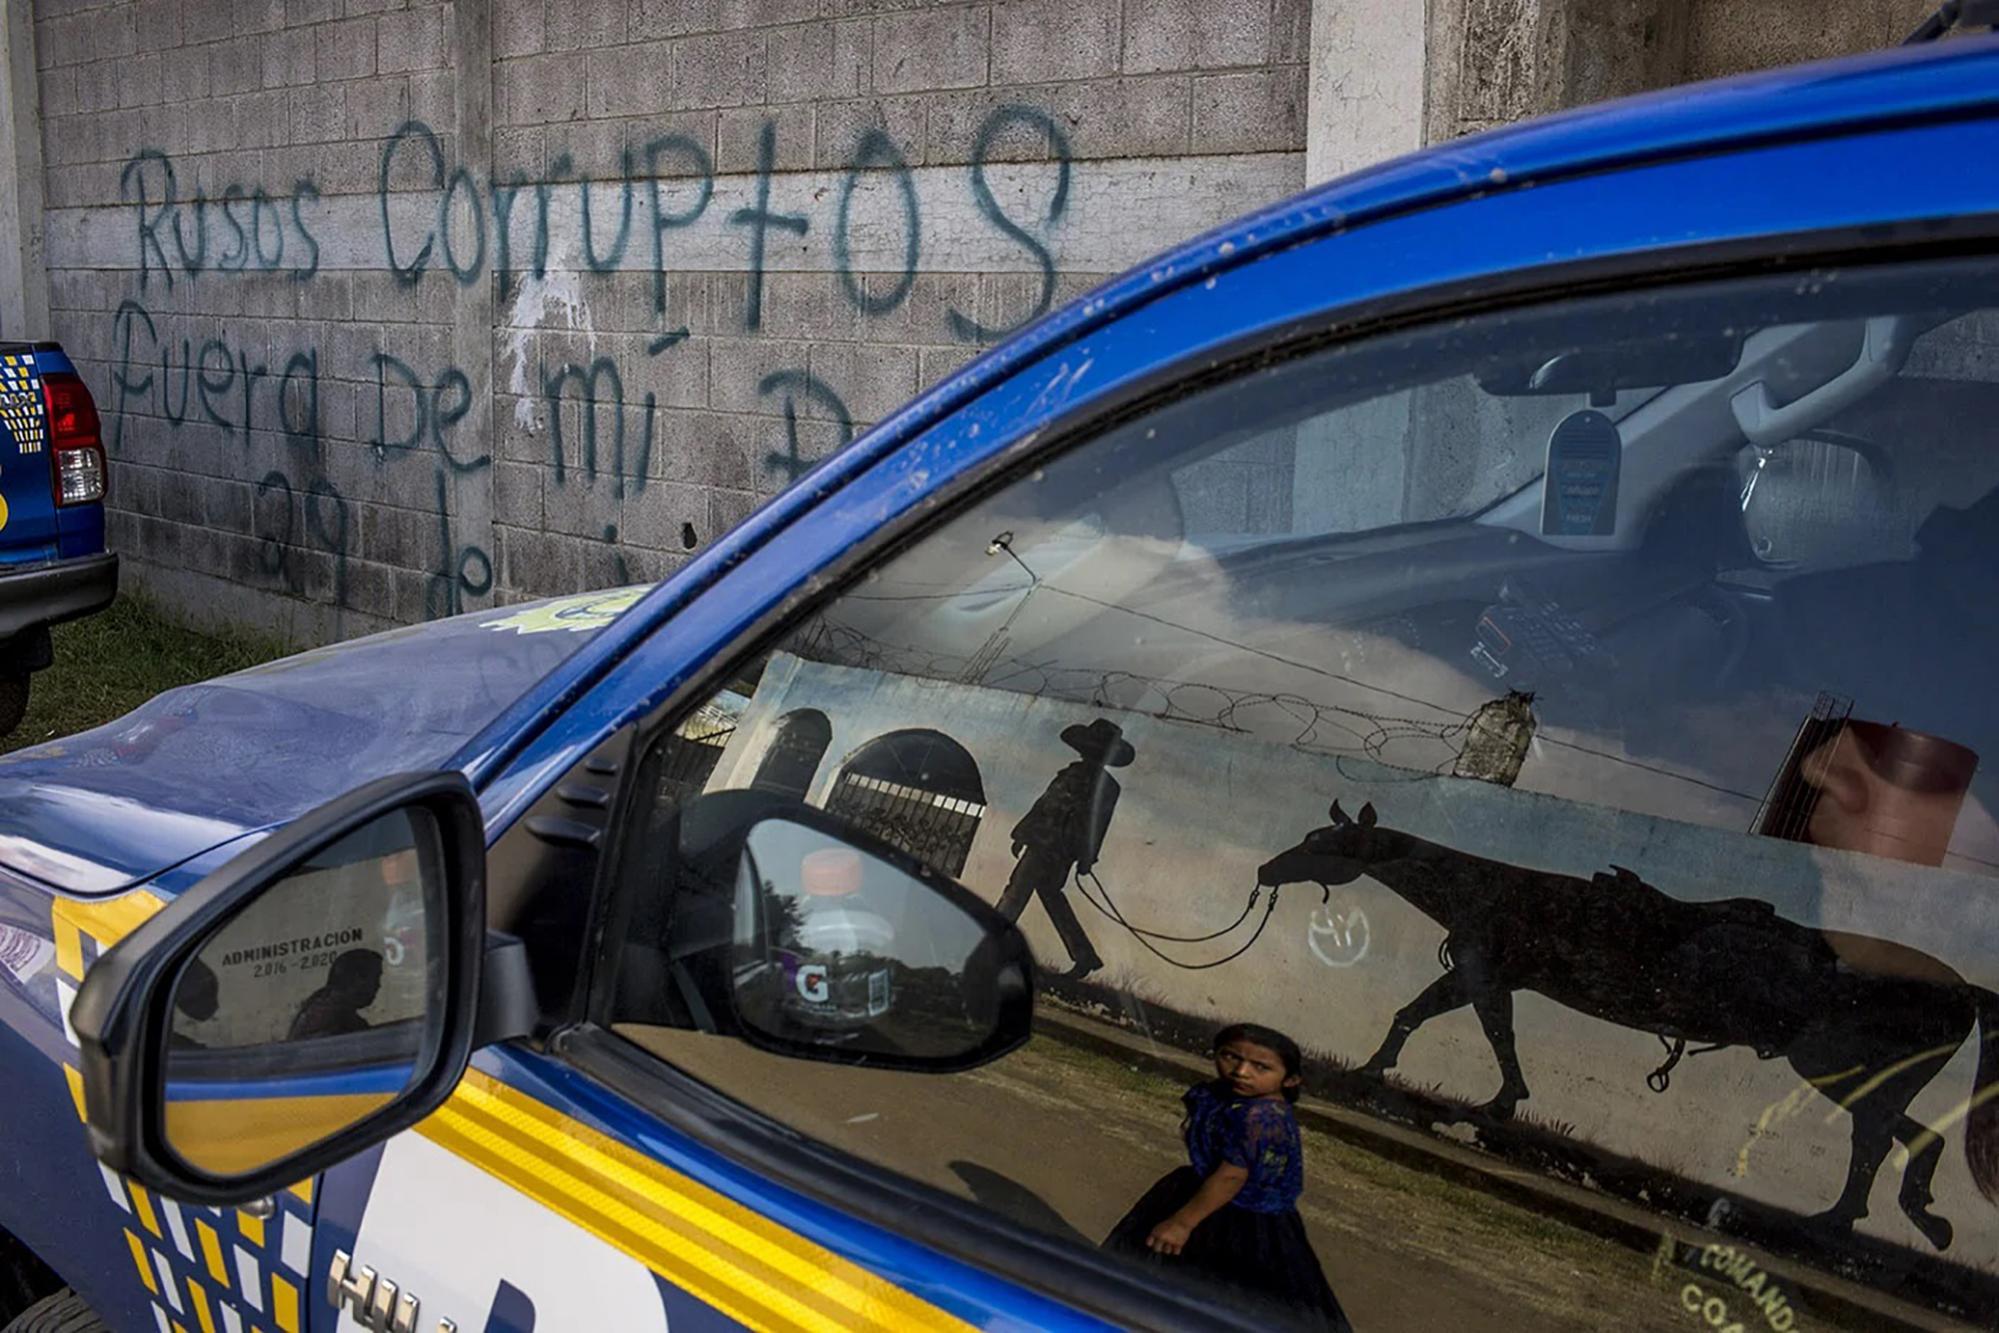 Graffiti denouncing the presence of the extractivist project with Russian capital on the wall of the community sporting complex in El Estor, transformed during after the declaration of martial law into a base for the National Civil Police and Army. Photo: Simone Dalmasso/Plaza Pública.